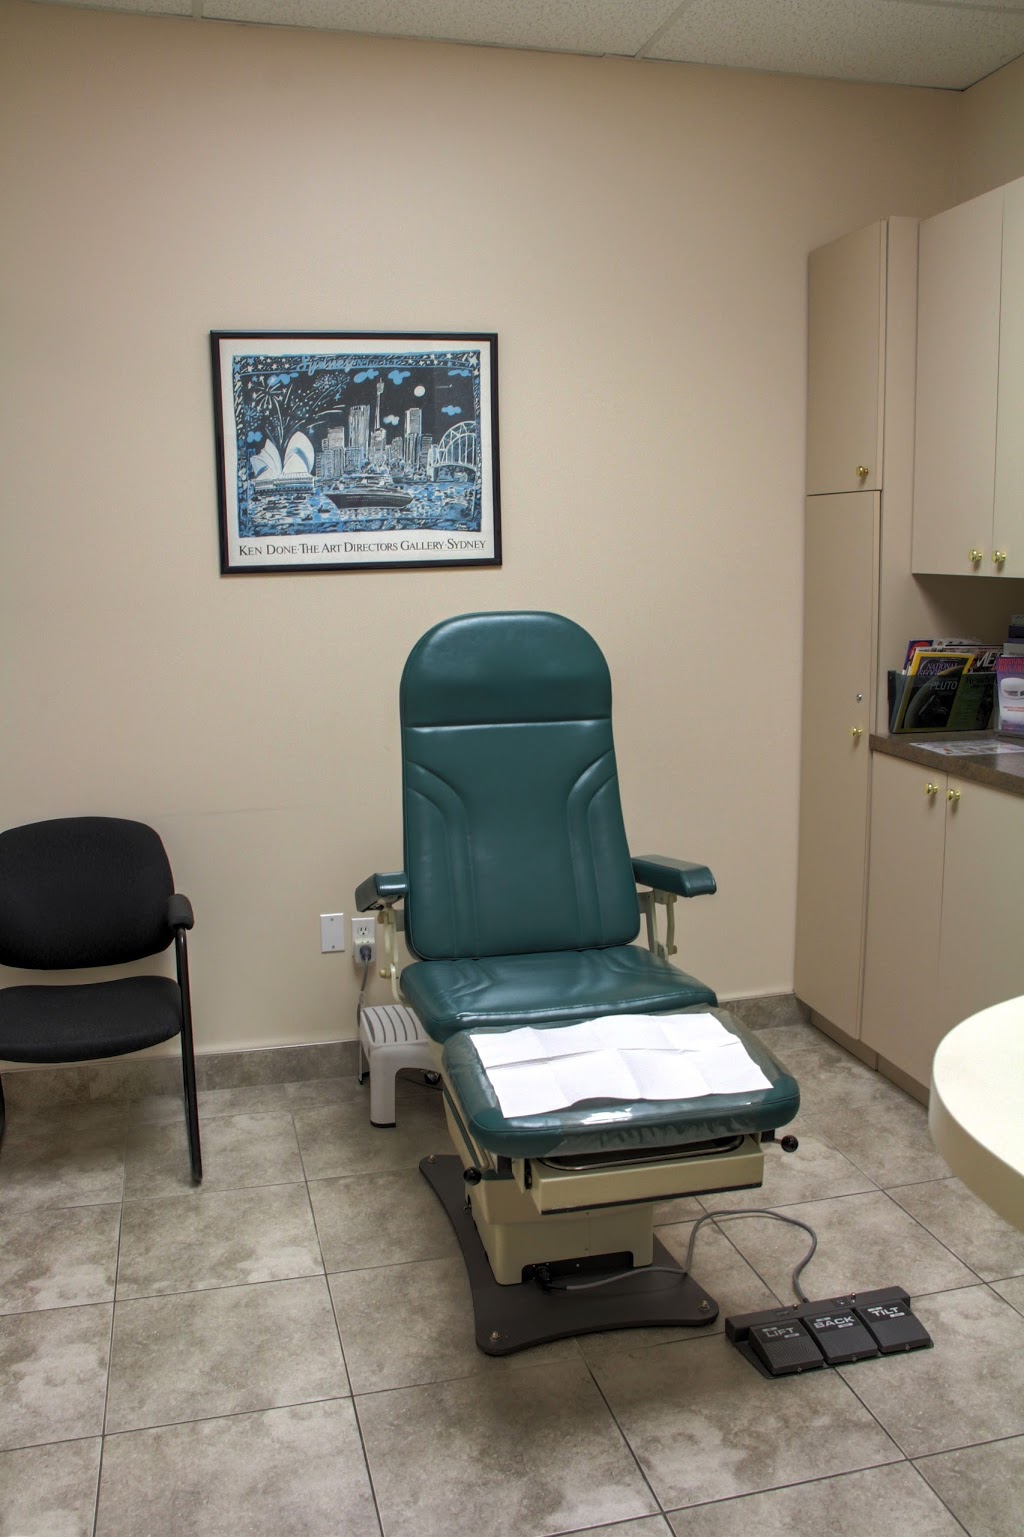 Durham Podiatry Associates | 15 Thickson Rd, Whitby, ON L1N 8W7, Canada | Phone: (905) 433-0200